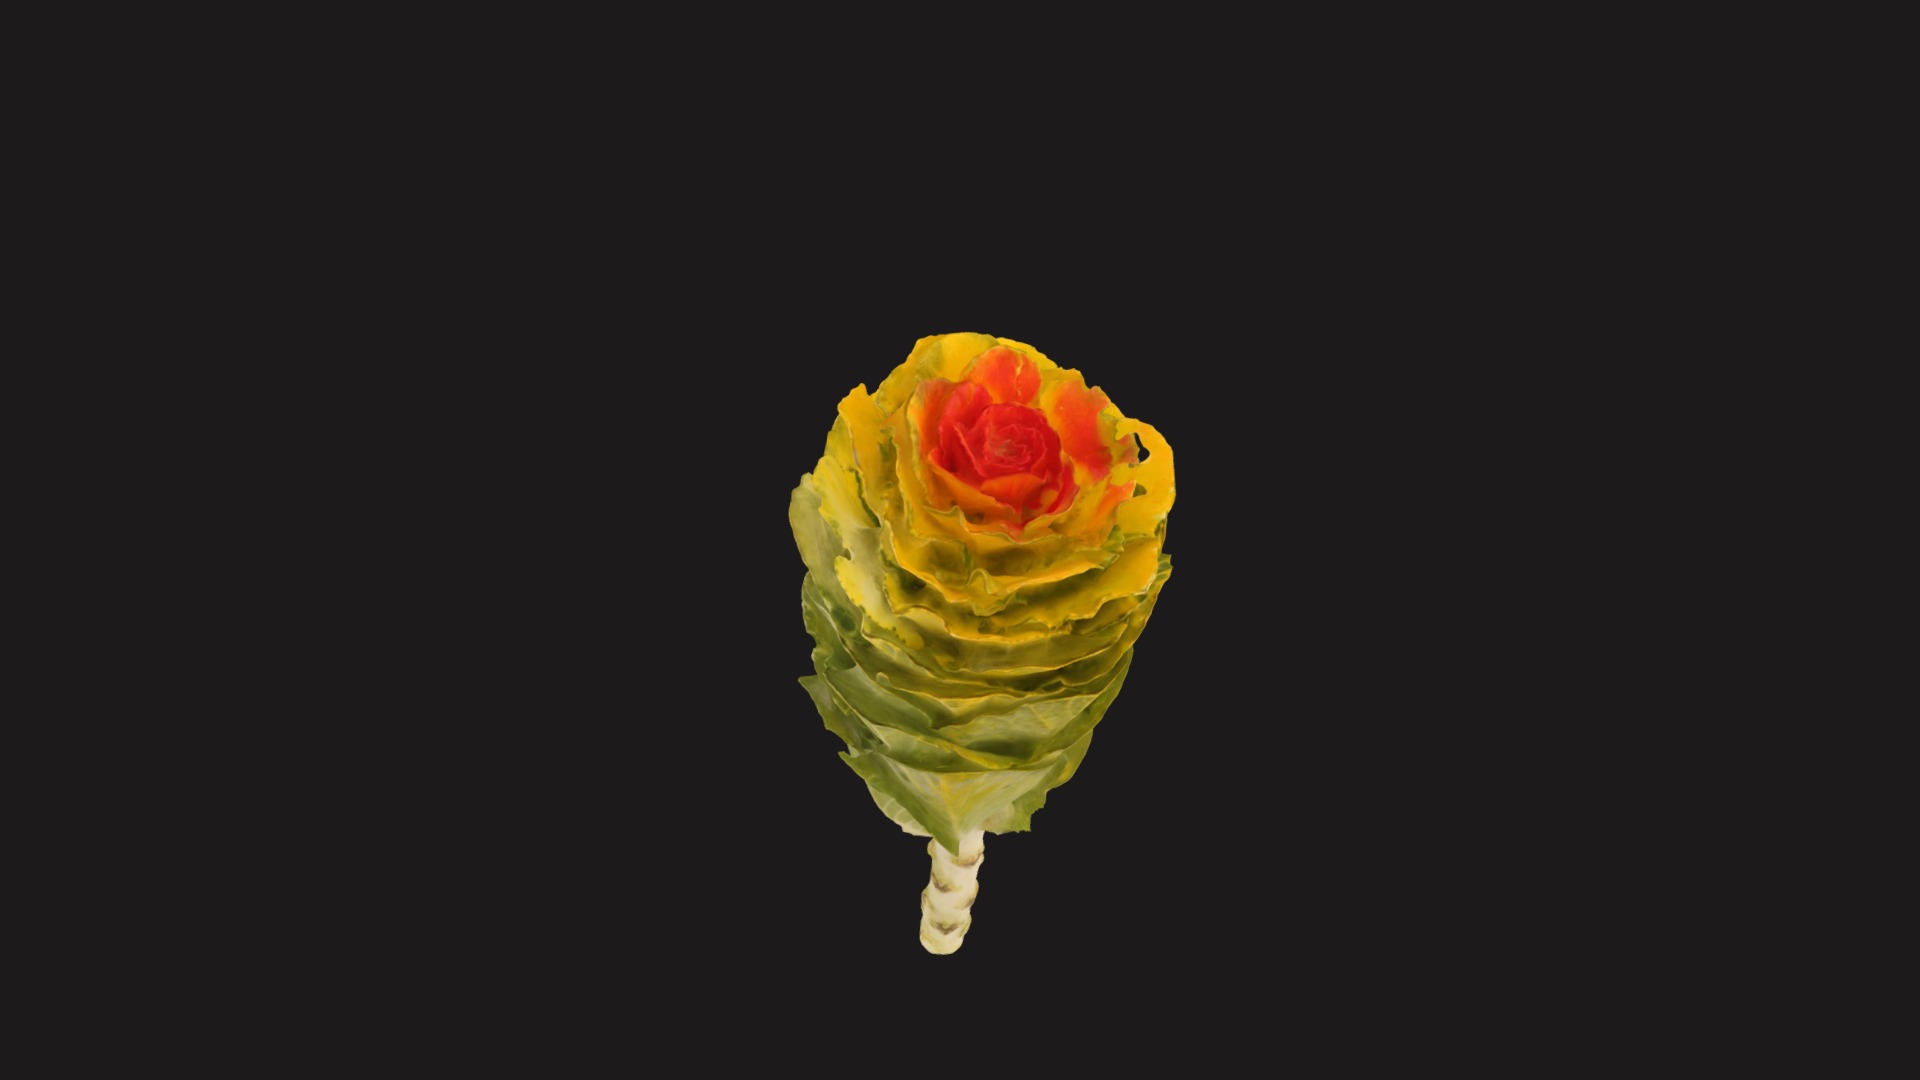 3D model Fw17 – Yellow Red Flower - This is a 3D model of the Fw17 - Yellow Red Flower. The 3D model is about a yellow rose with a black background.